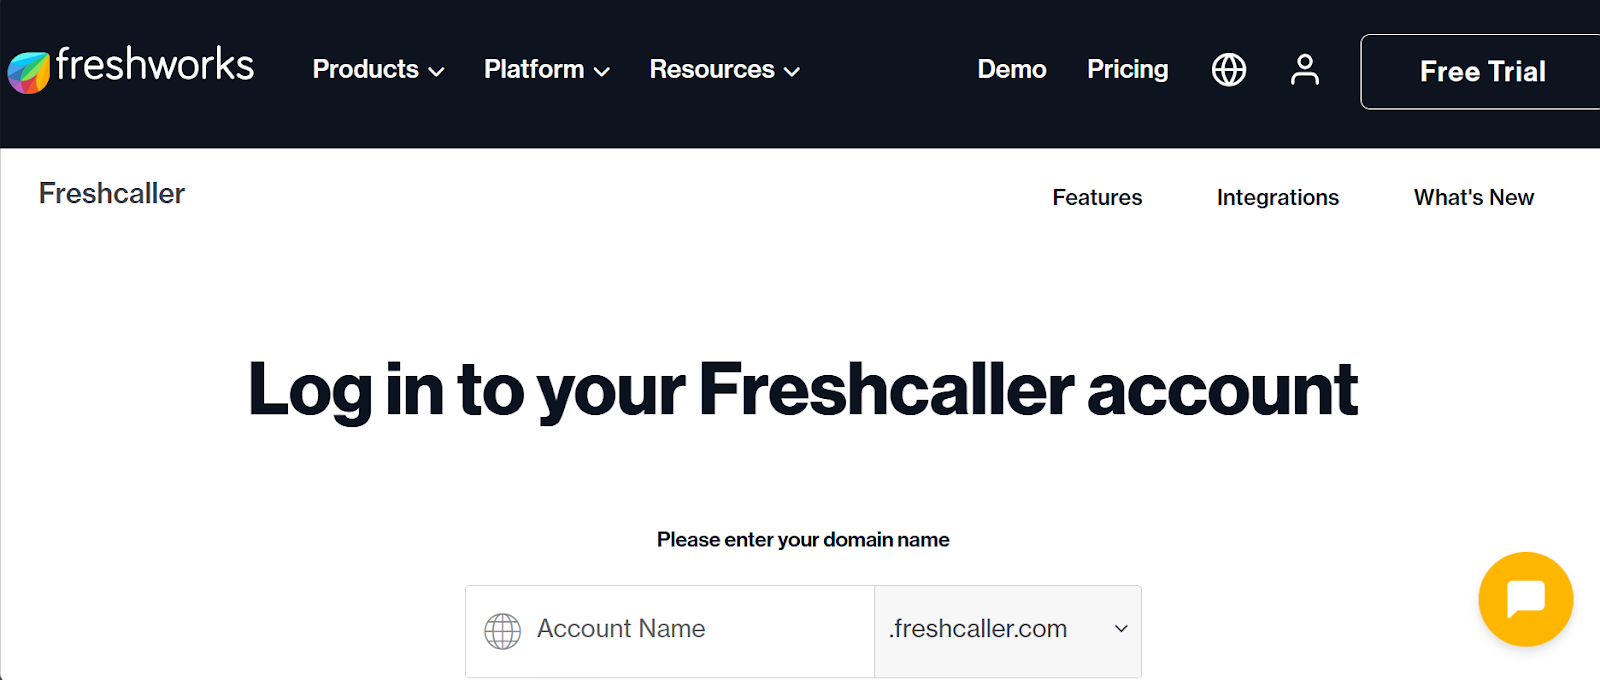 Freshcaller website snapshot highlighting the services it offers.